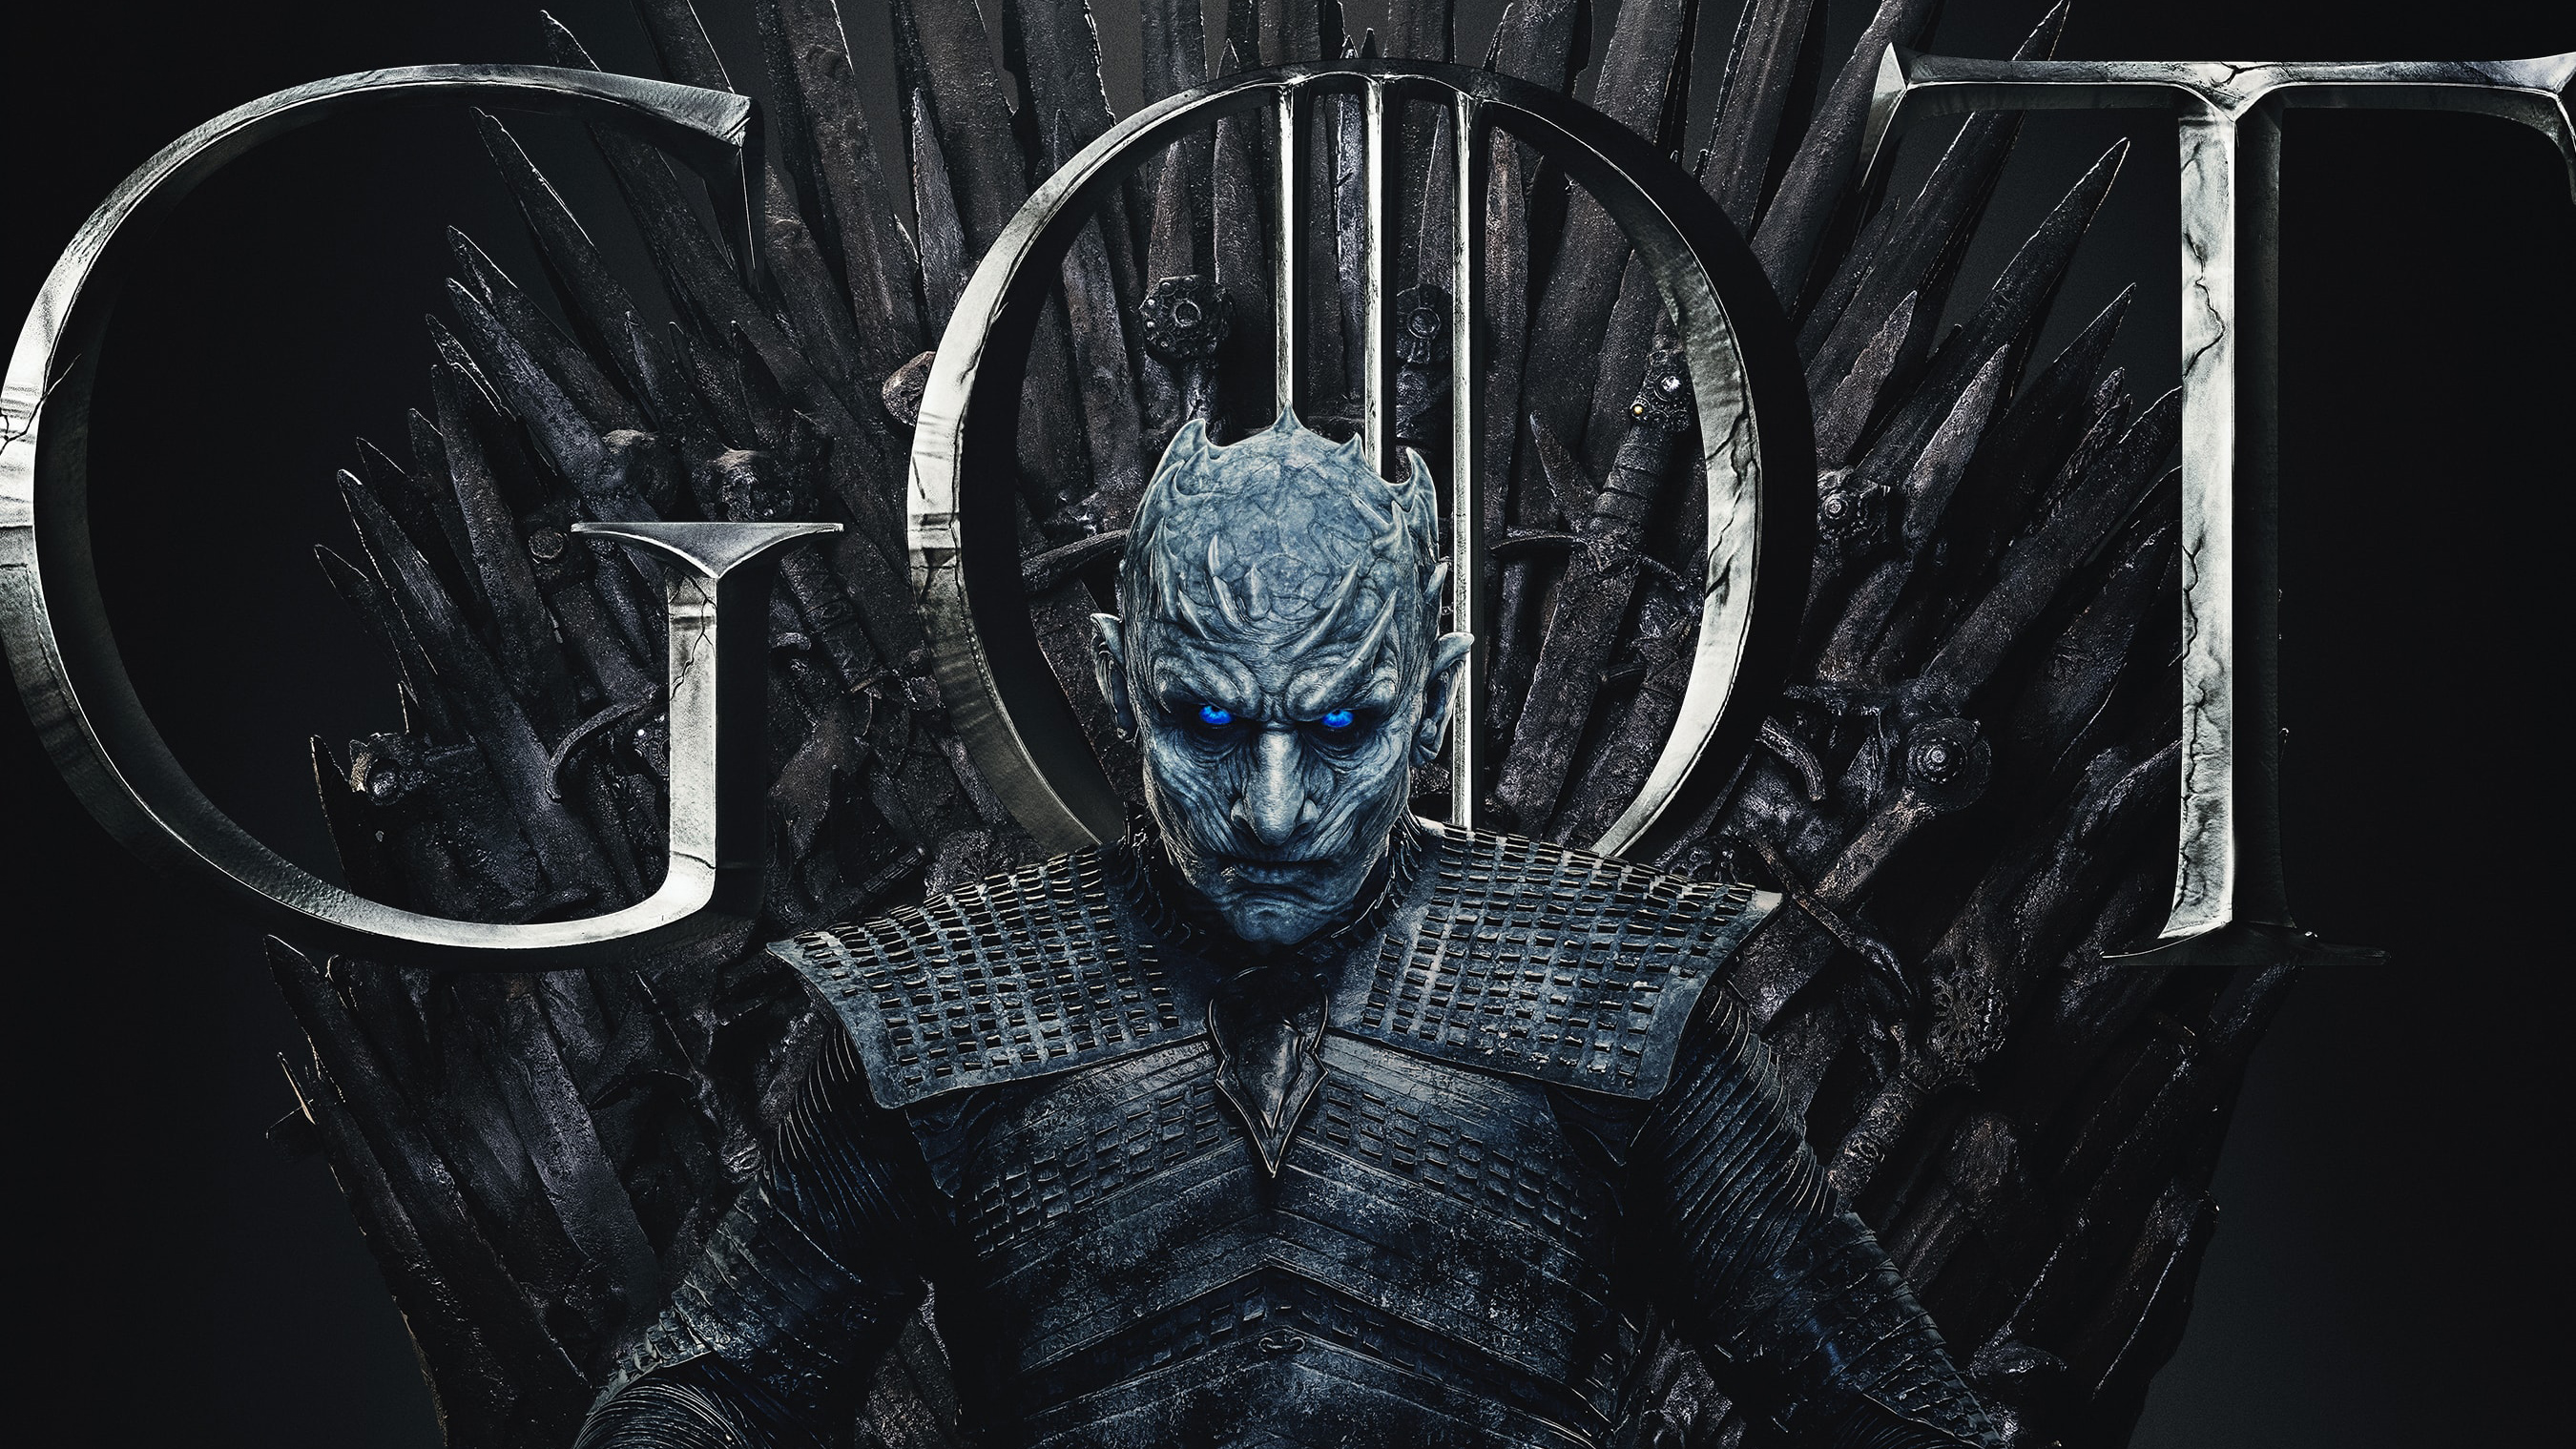 Night King Game Of Thrones Season 8 Poster, HD Tv Shows ...